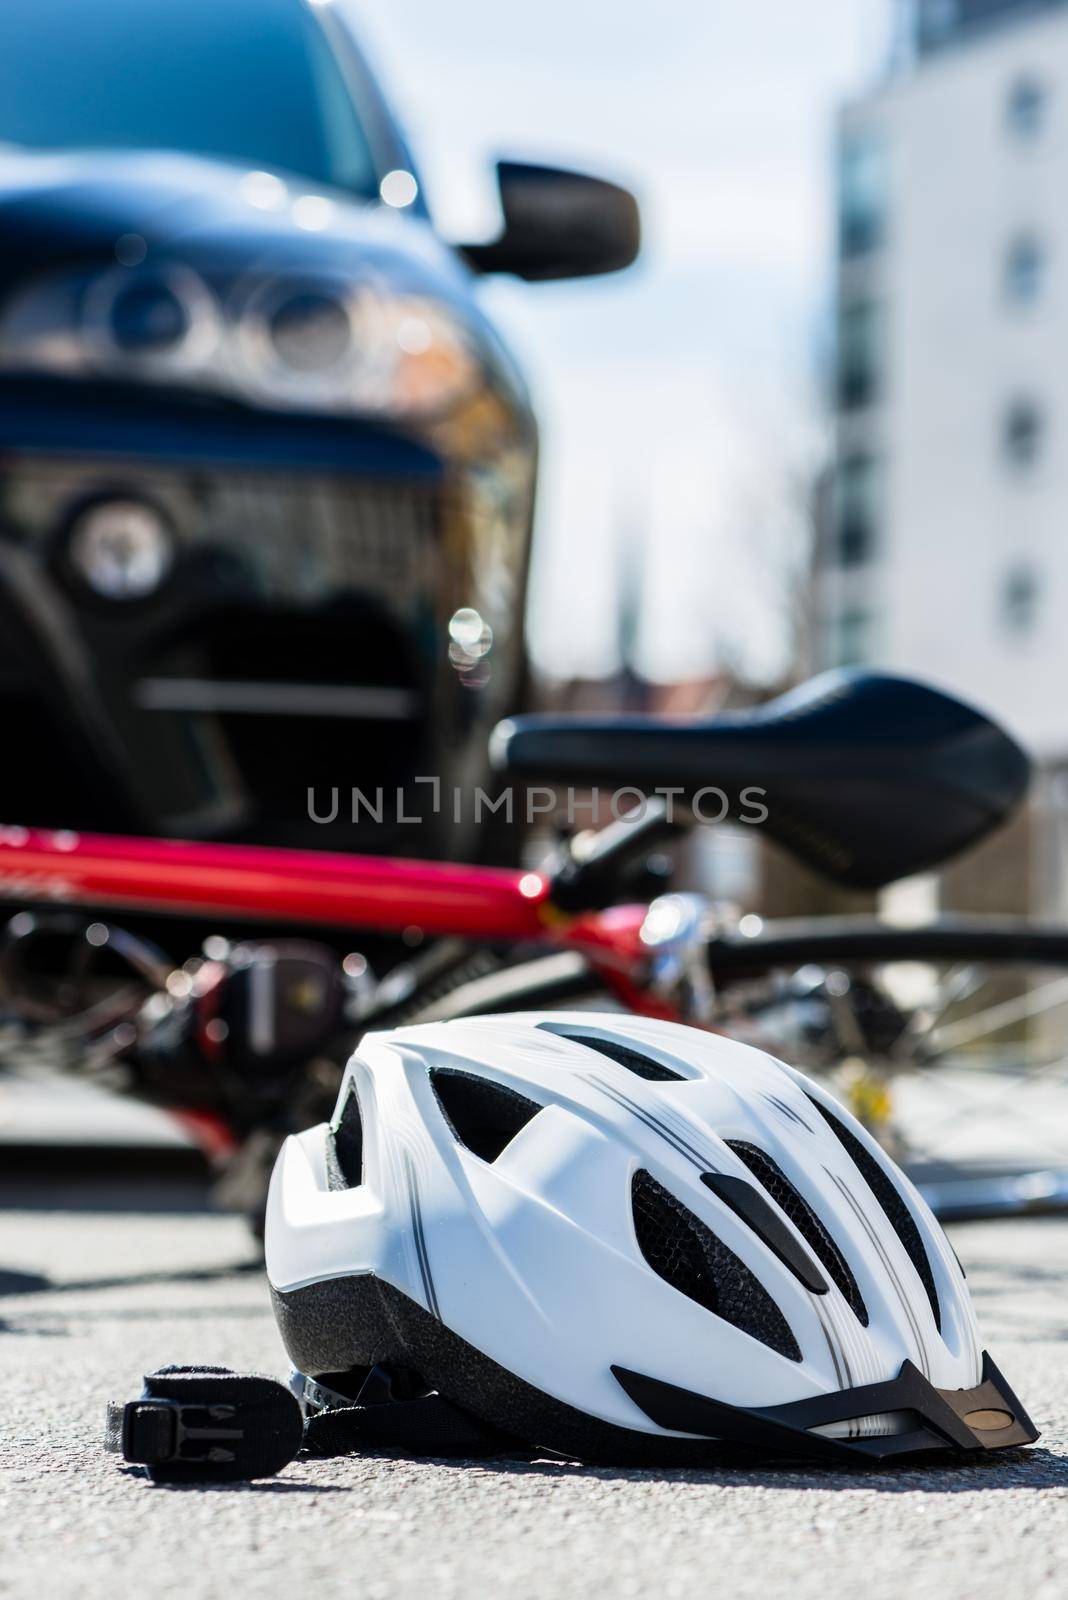 Close-up of a bicycling helmet fallen on the asphalt next to a bicycle after car accident on the street in the city